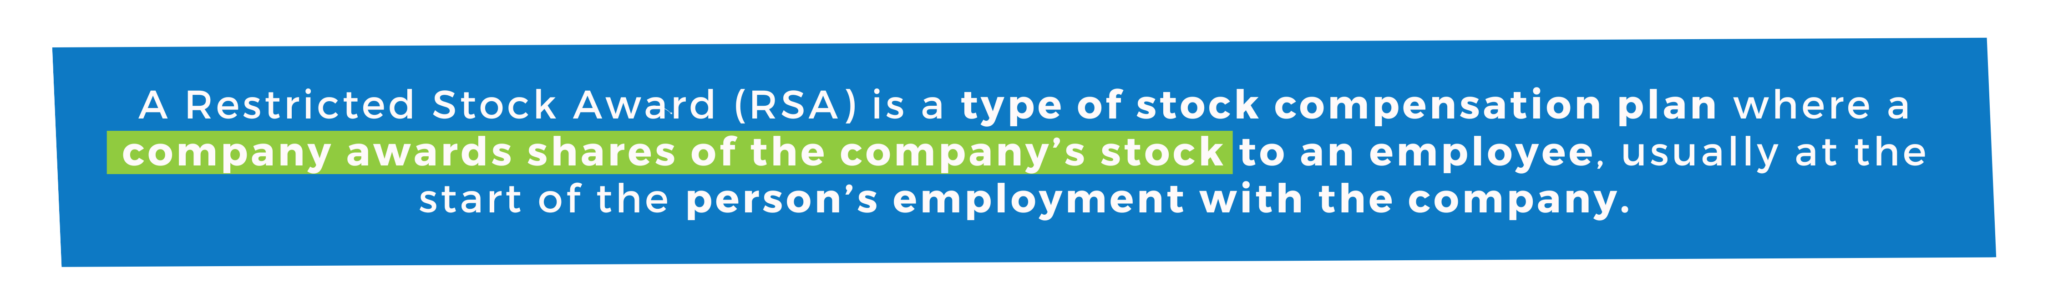 A Restricted Stock Award (RSA) is a type of stock compensation plan where a company awards shares of the company’s stock to an employee, usually at the start of the person’s employment with the company.